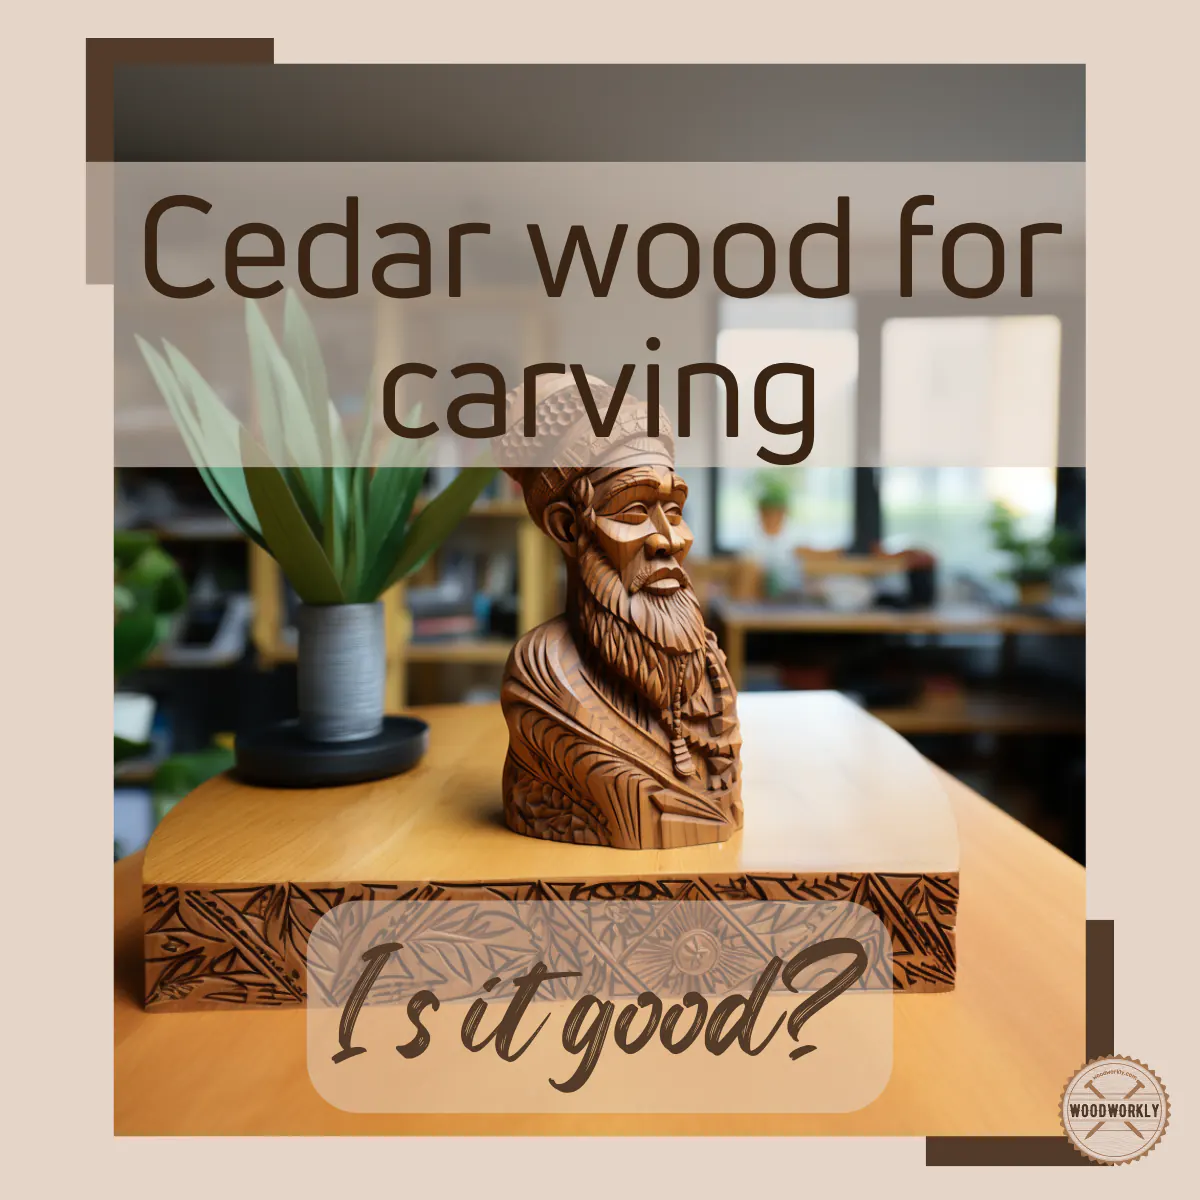 Is Cedar Good For Carving